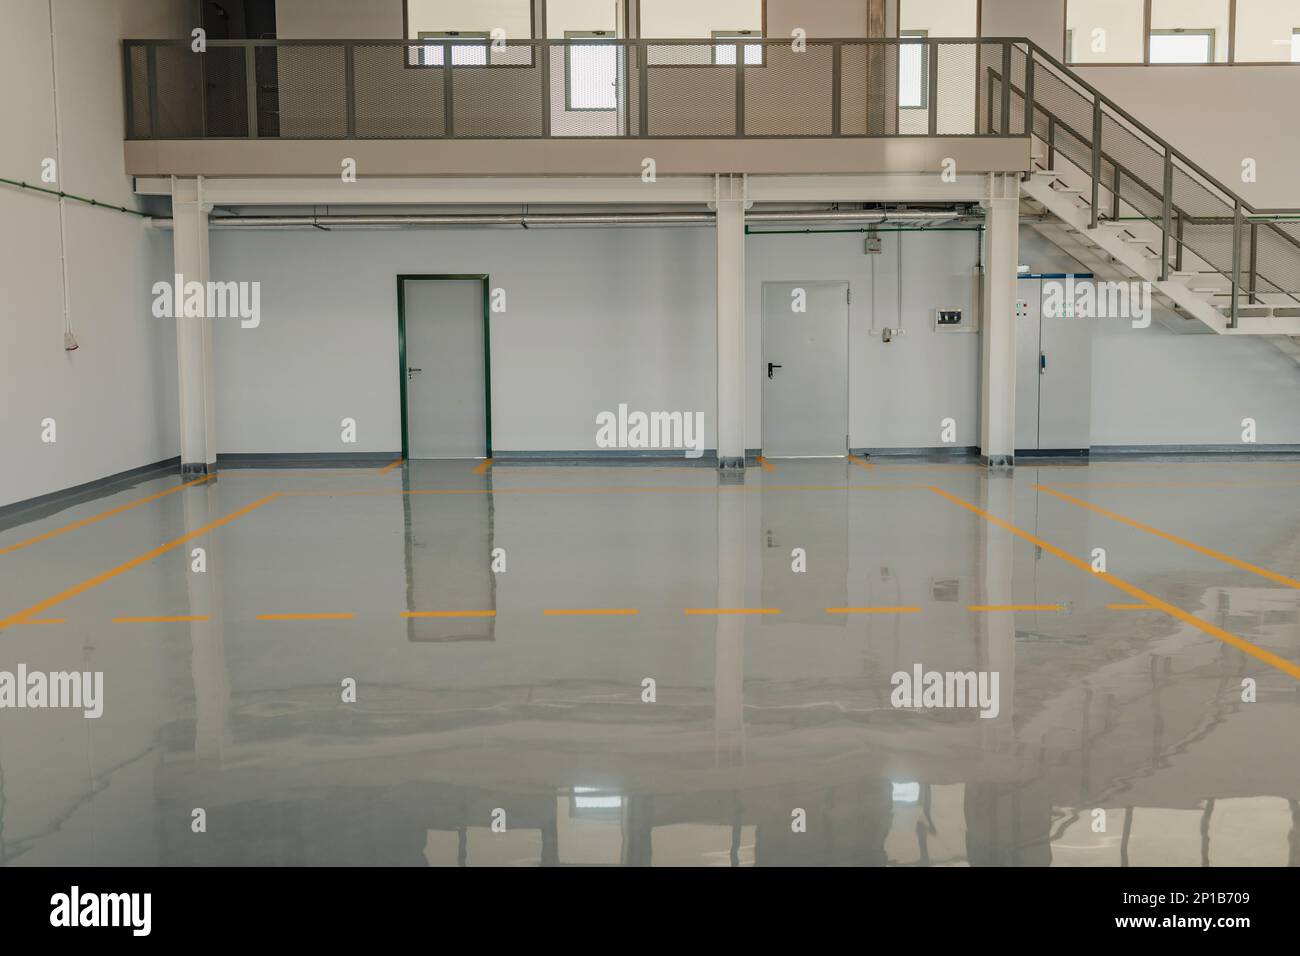 New  resin floor coating and marking signs in a car workshop. Stock Photo